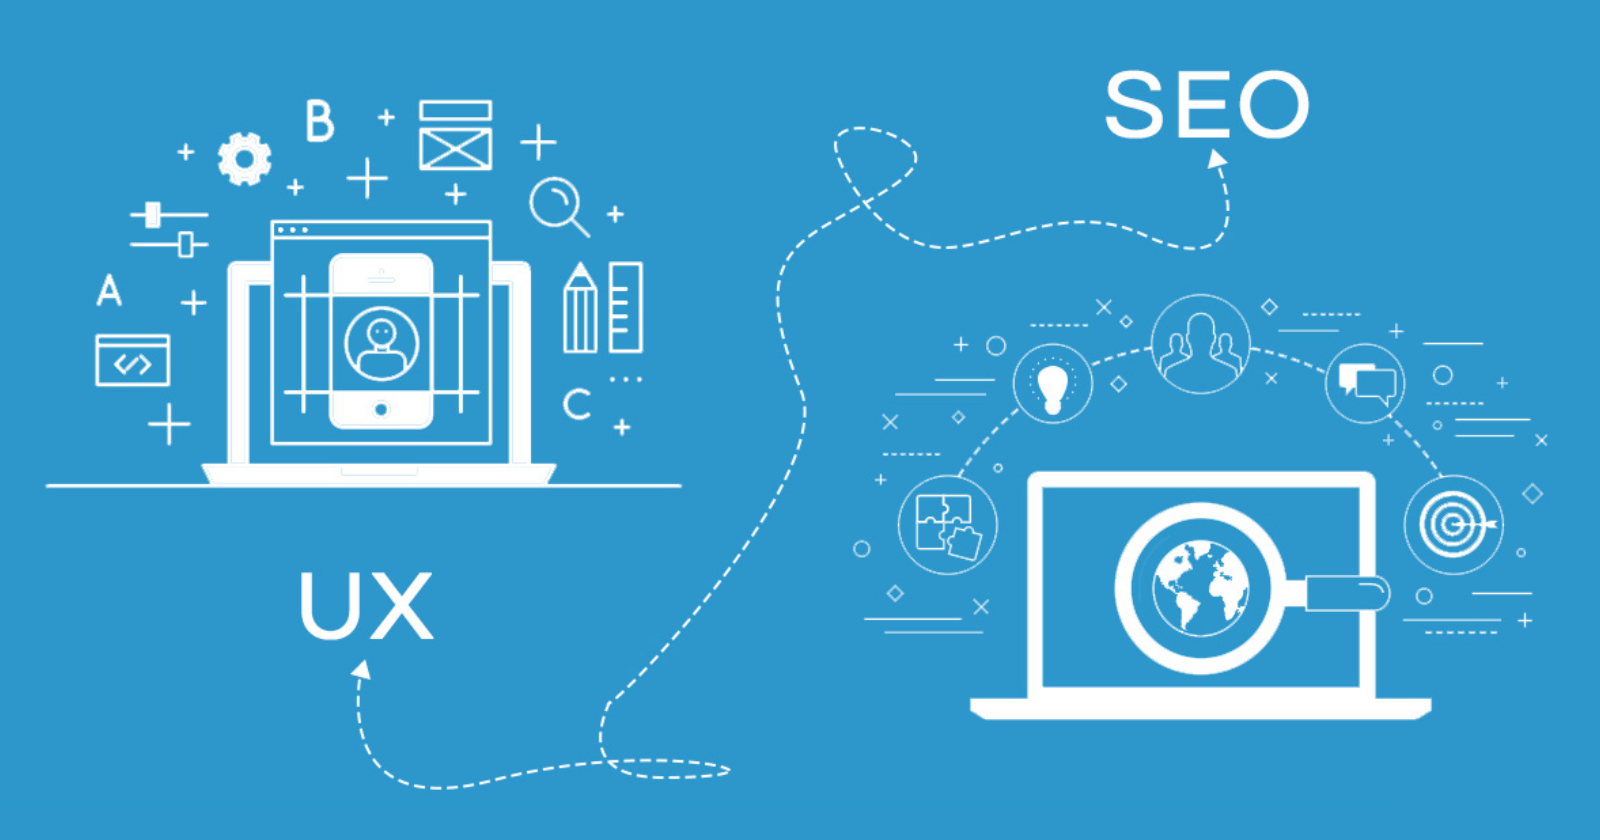 How to get your UX and SEO to work together perfectly